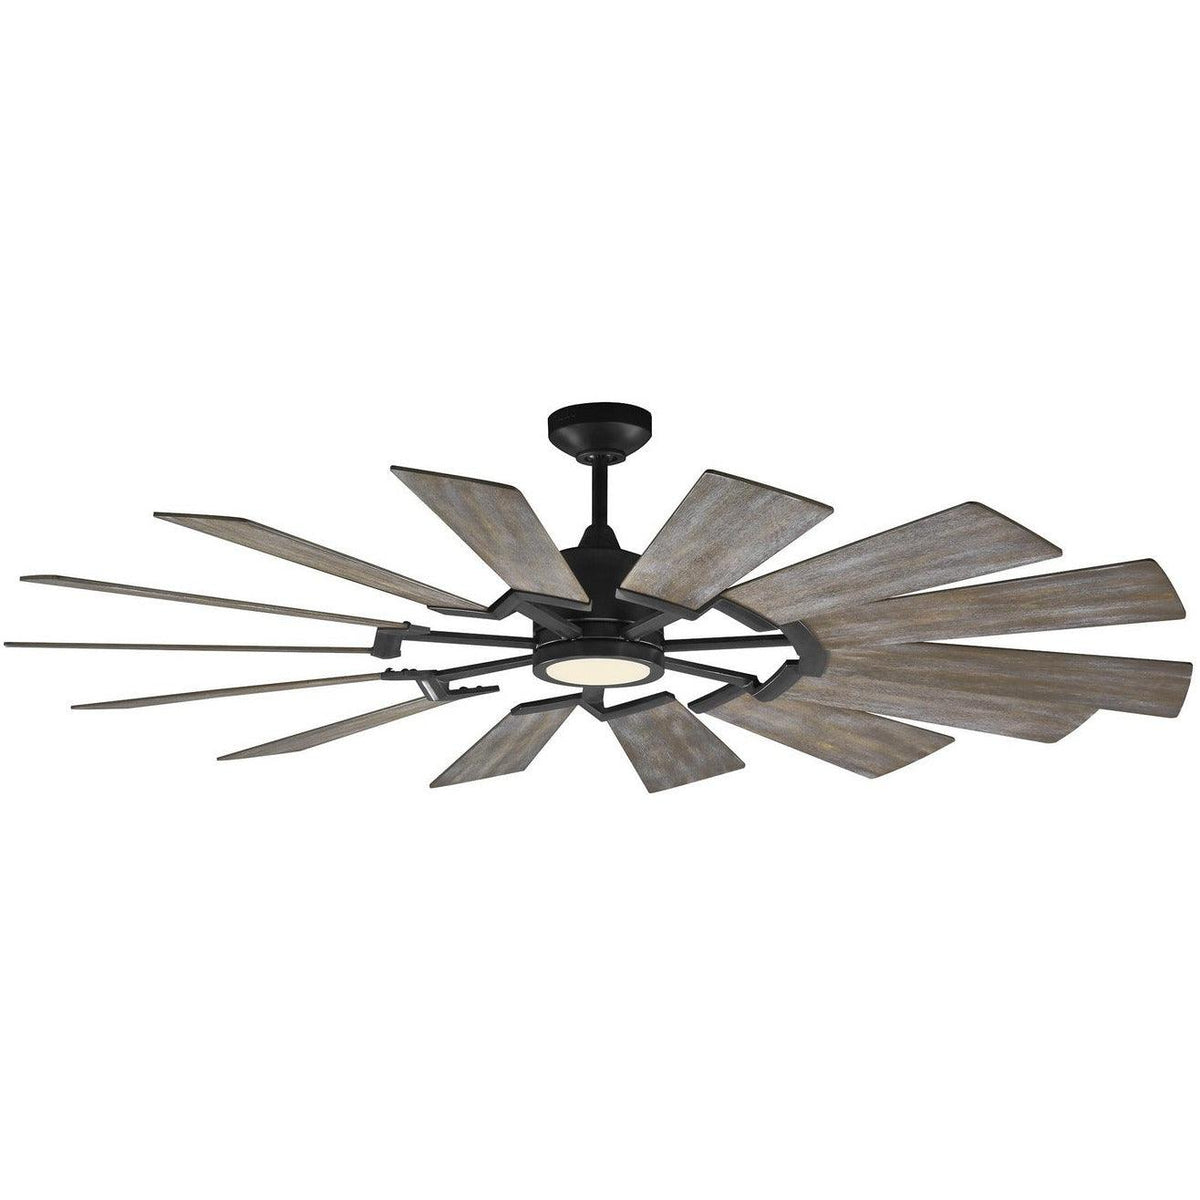 Visual Comfort Fan Collection - Prairie Ceiling Fan - 14PRR62AGPD | Montreal Lighting & Hardware